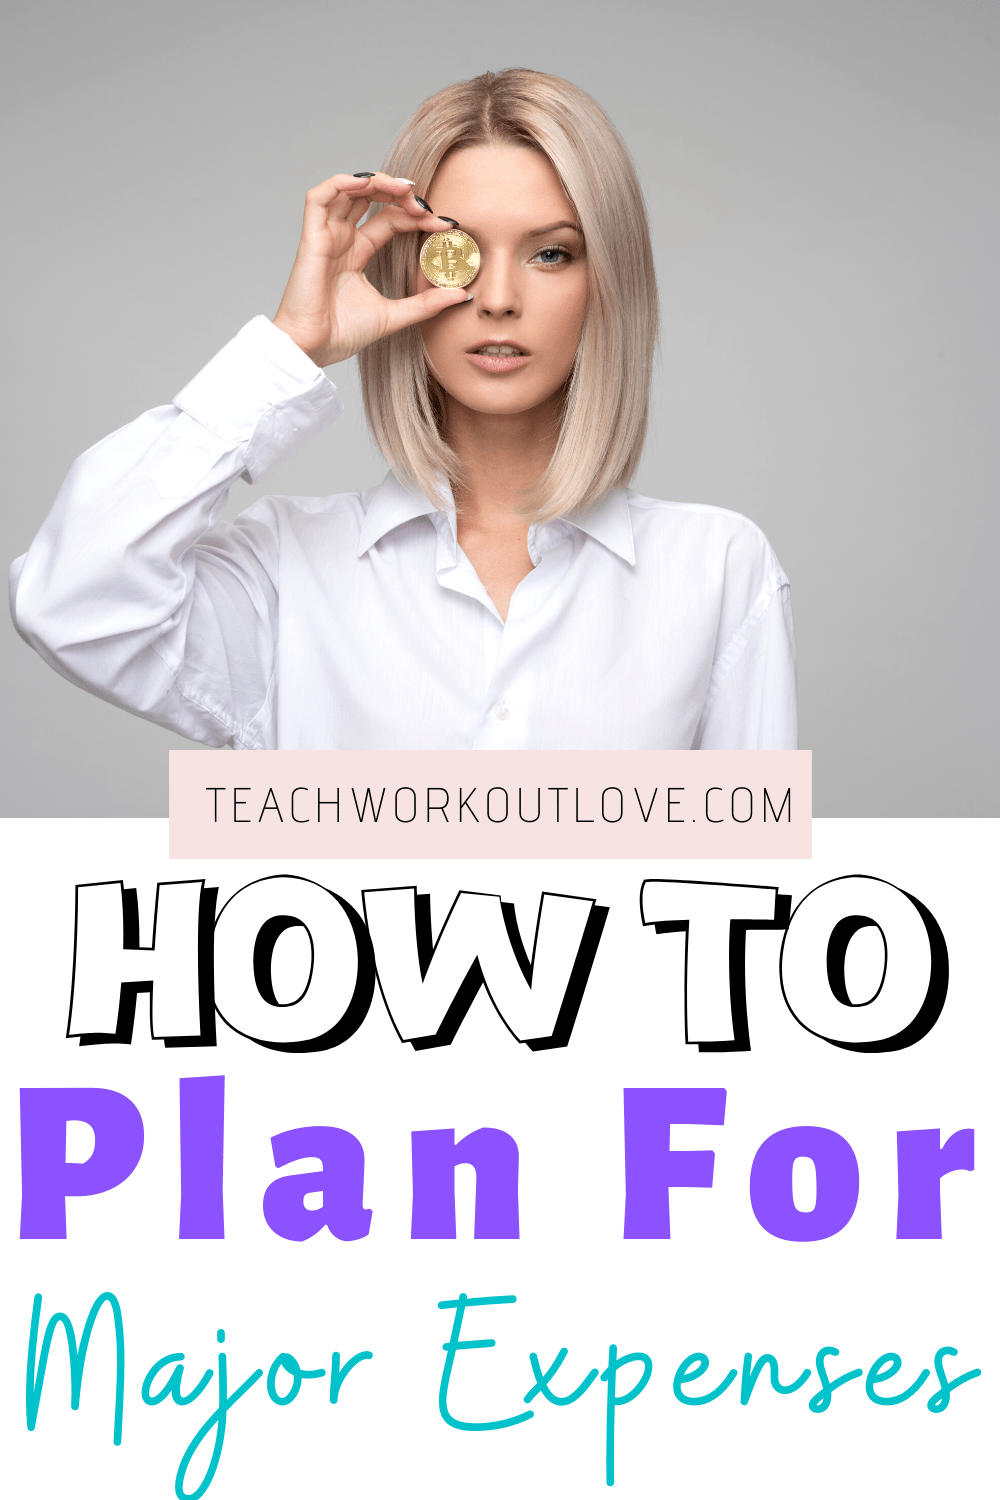 Major expenses will come out of no where. It is important to have already planned for this. Here are some tips on how to start planning in case you haven't.